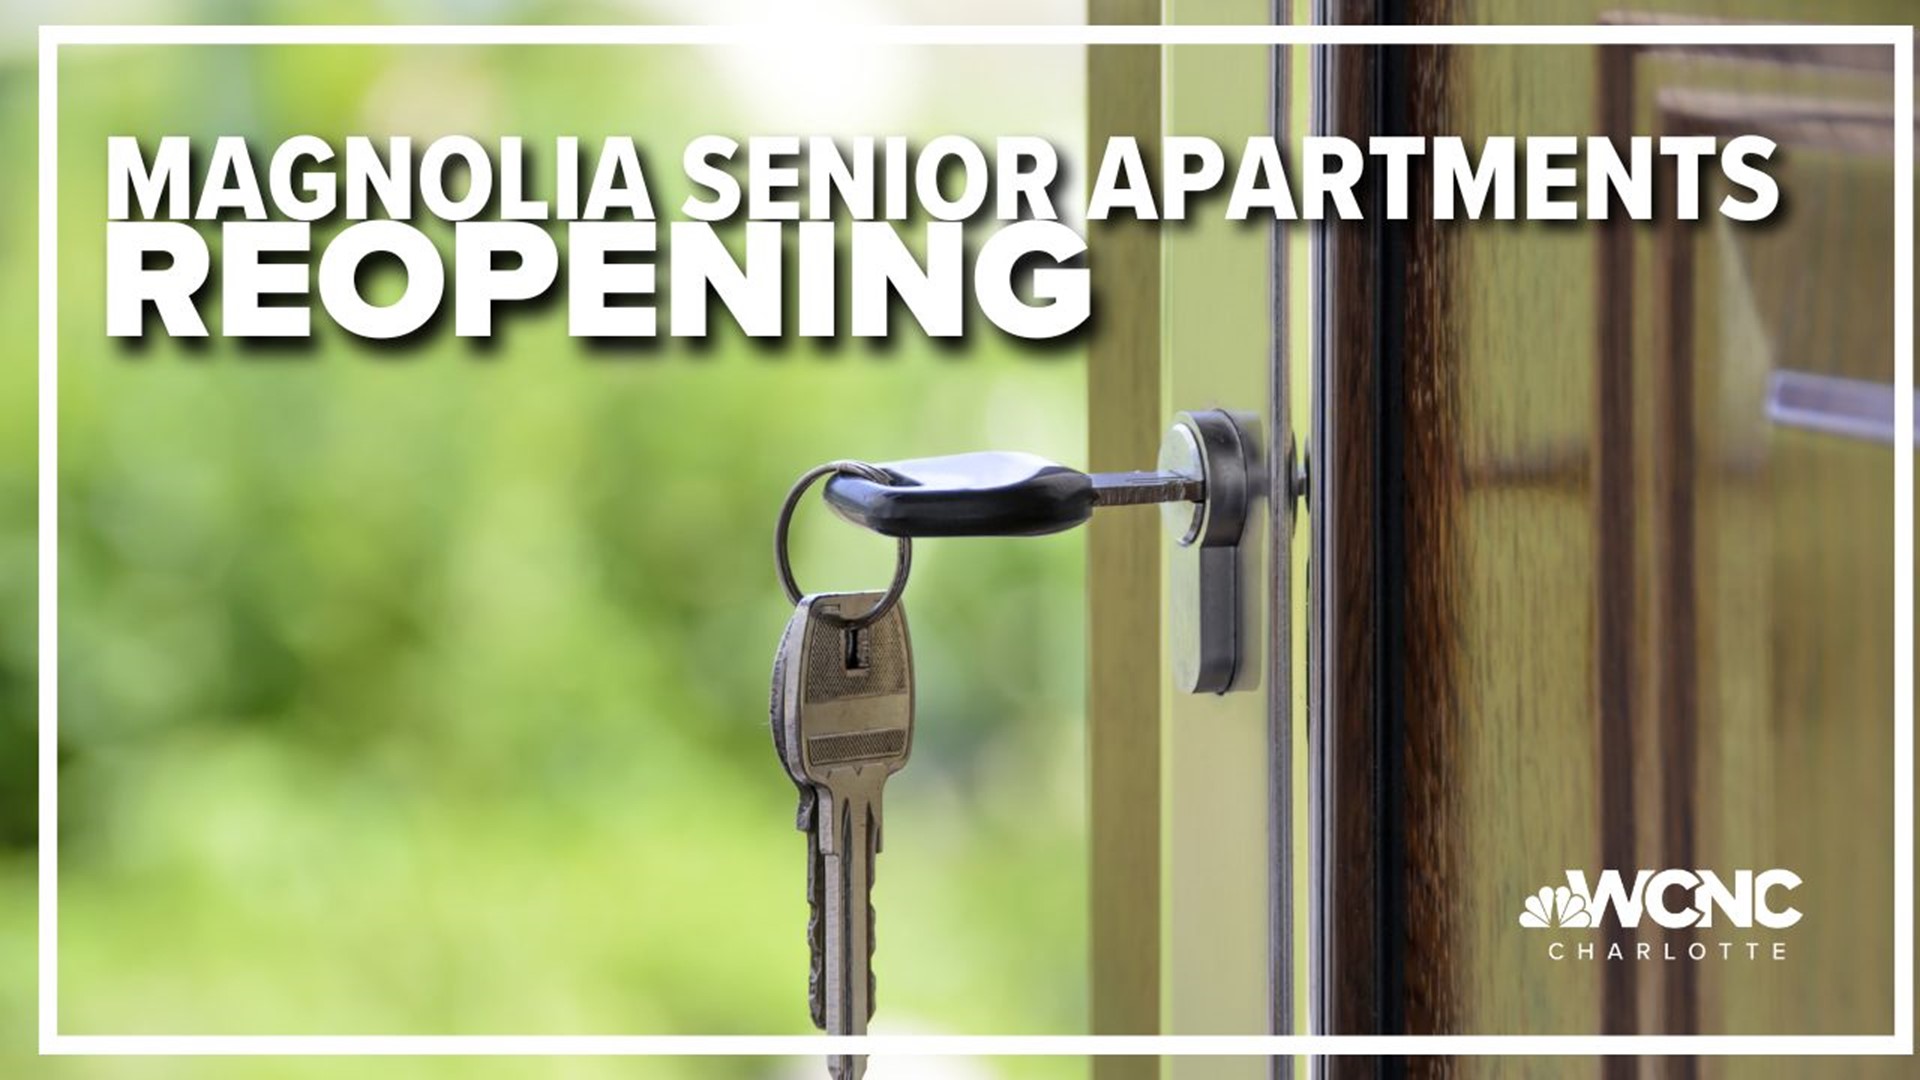 More than five months after being forced out of their homes due to flooding, 10 seniors moved back in at the Magnolia Senior Apartments Thursday.